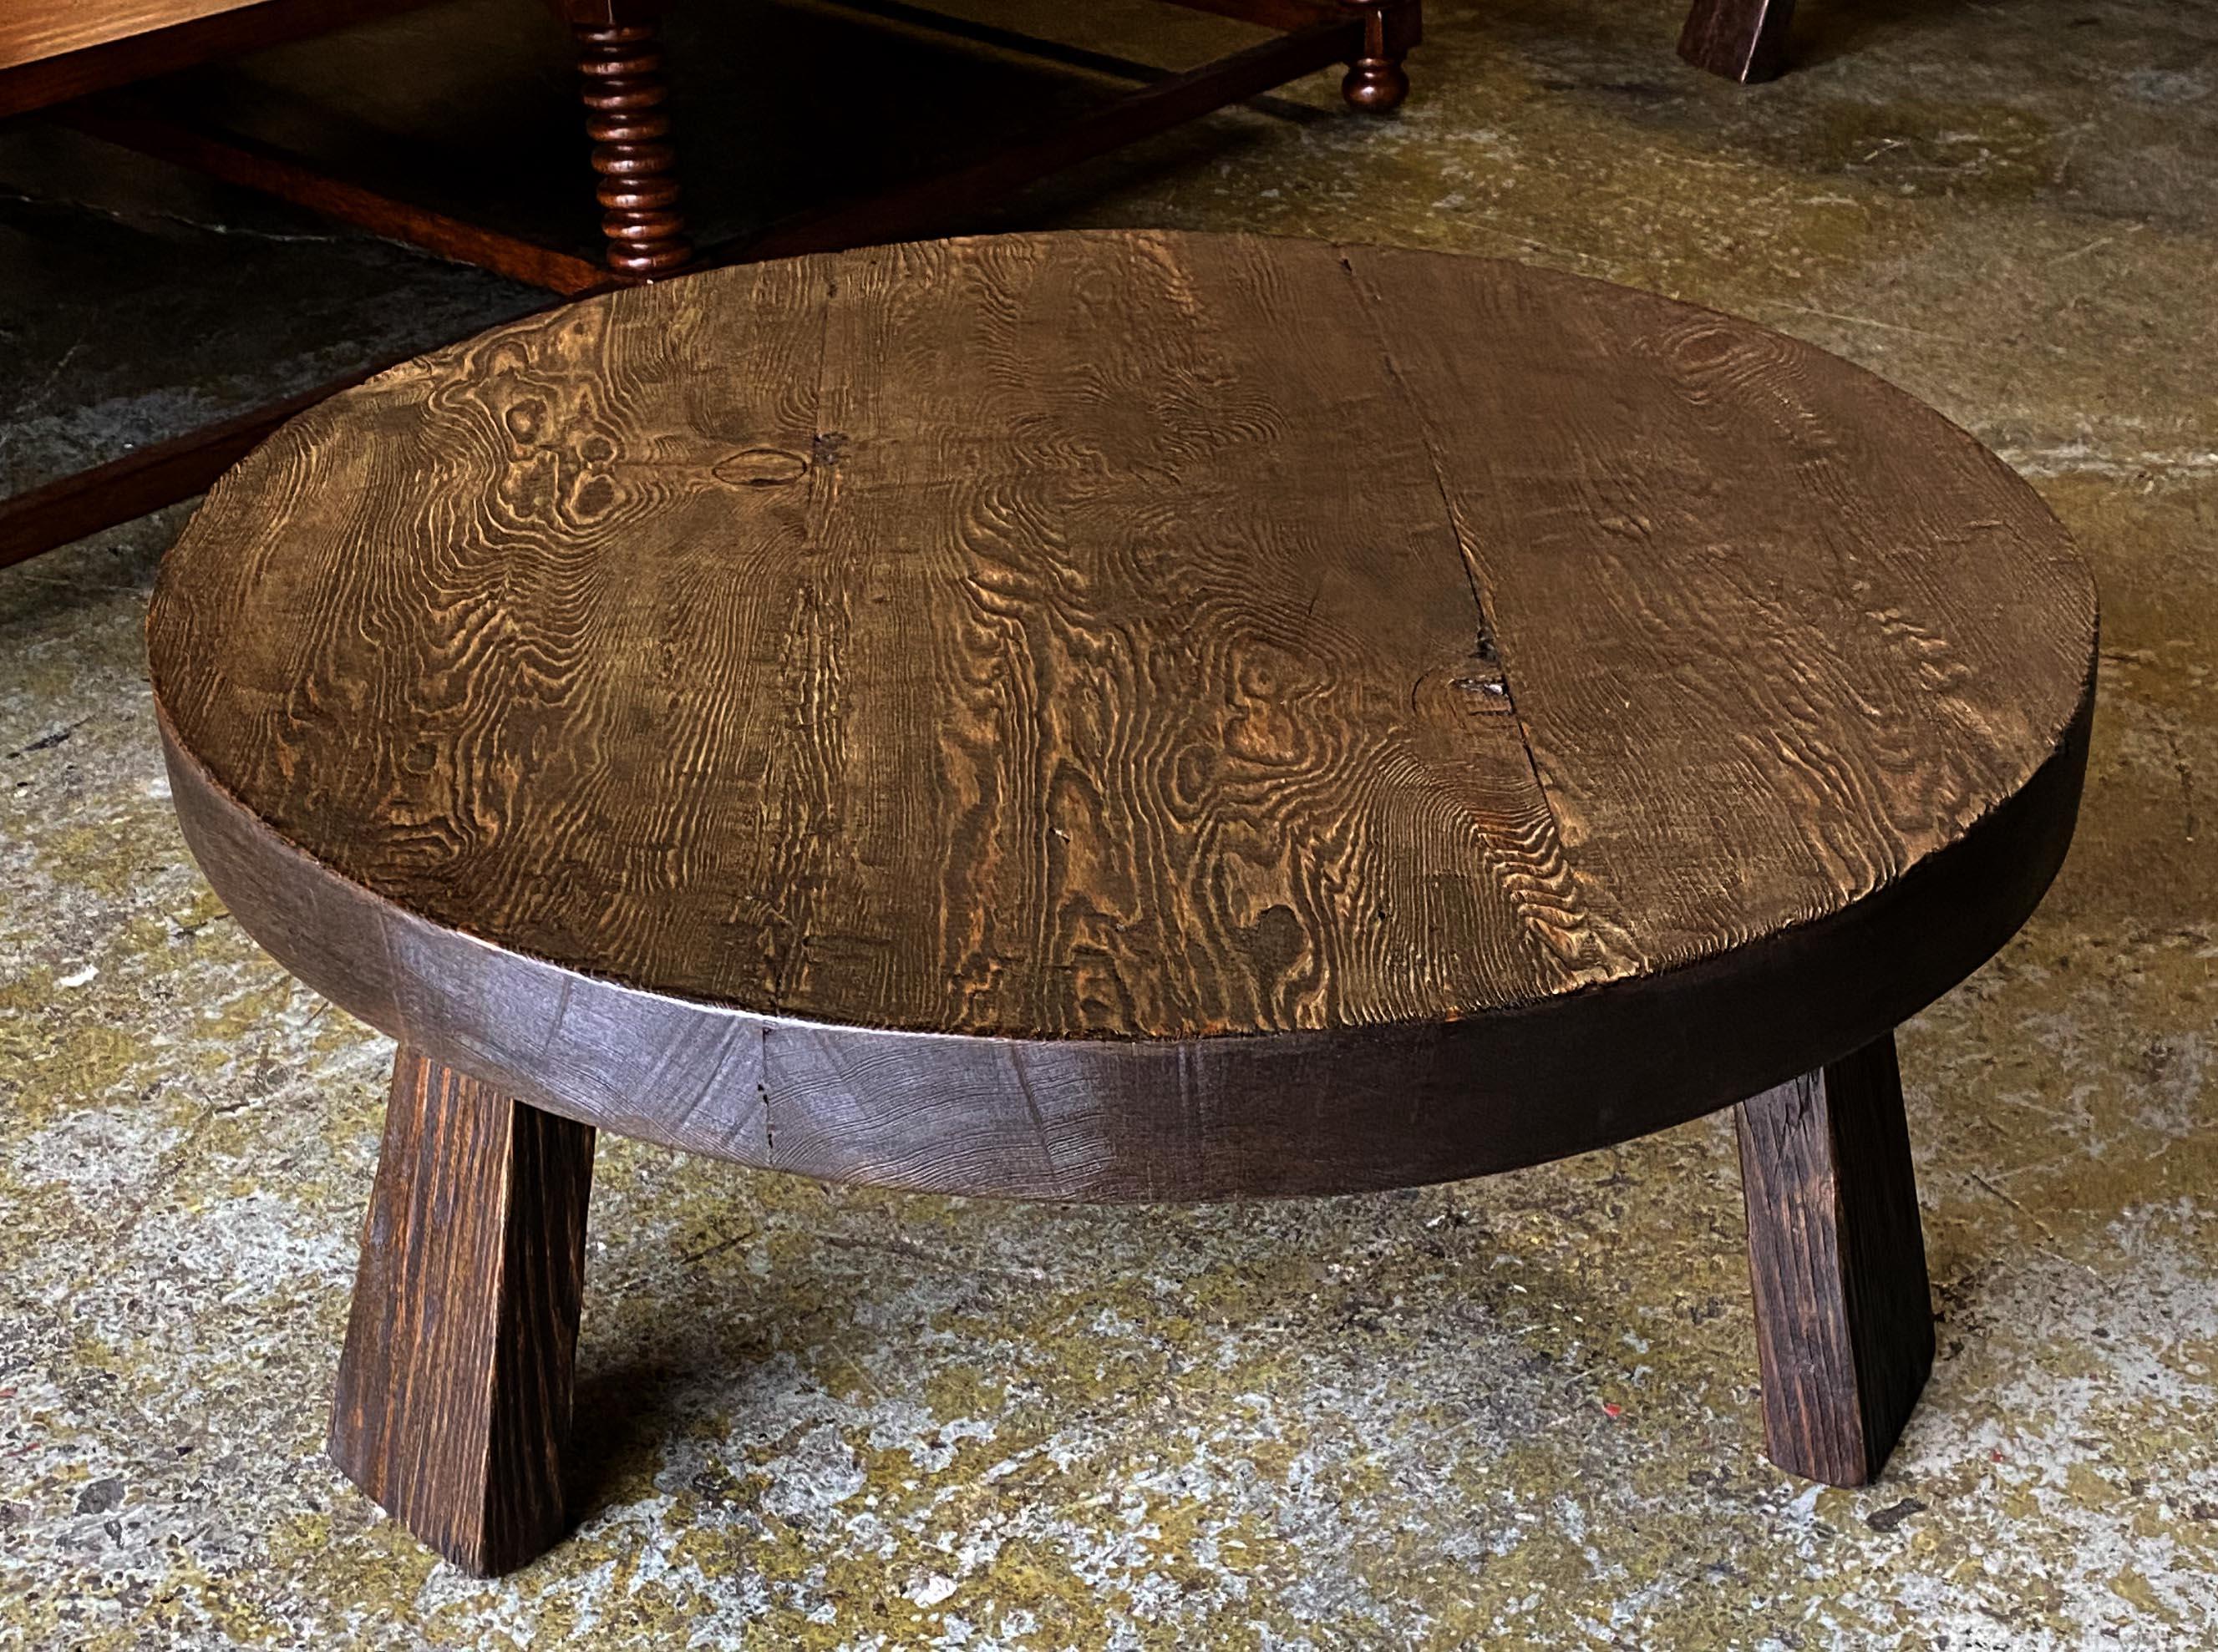 This reclaimed Douglas fir coffee table consists of a 3